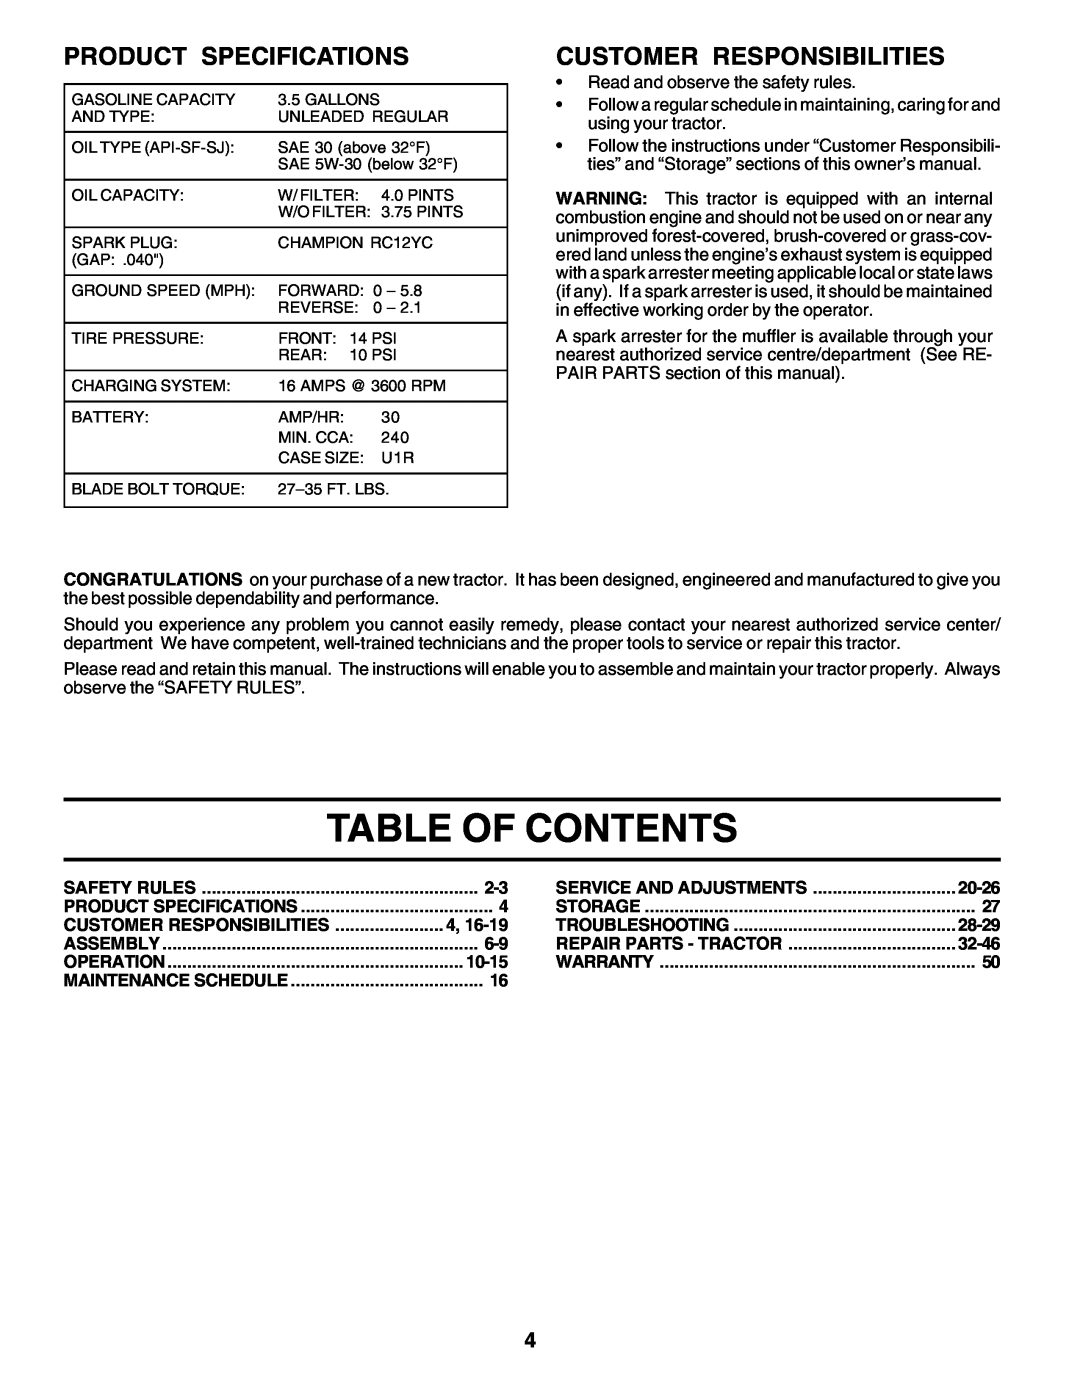 Poulan 177937 owner manual Table Of Contents, Product Specifications, Customer Responsibilities 